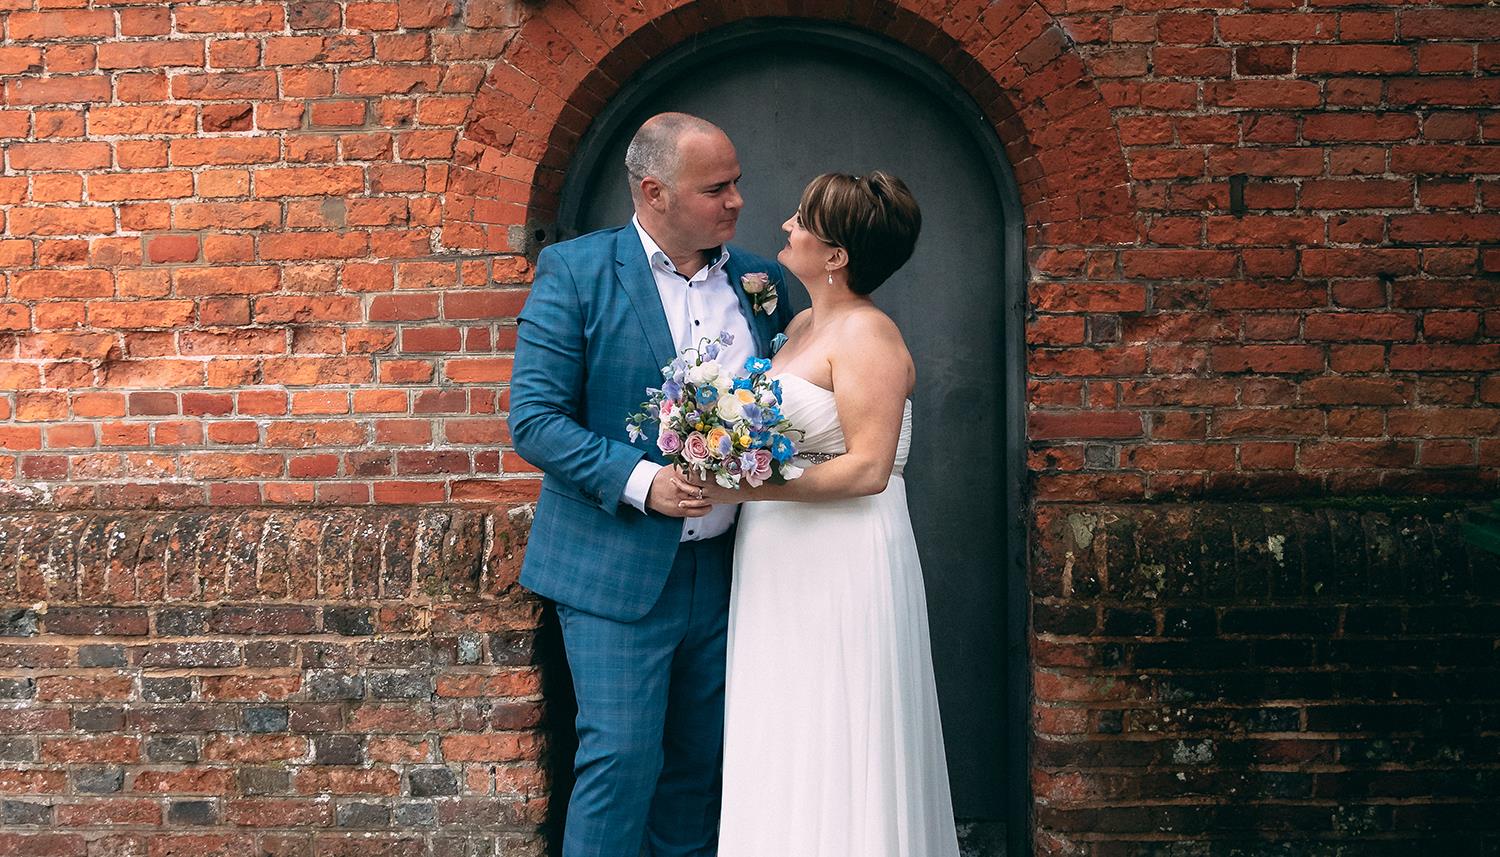 Couple with bouquet standing in front of arched door in brick wall. Photo Credit: F J West 